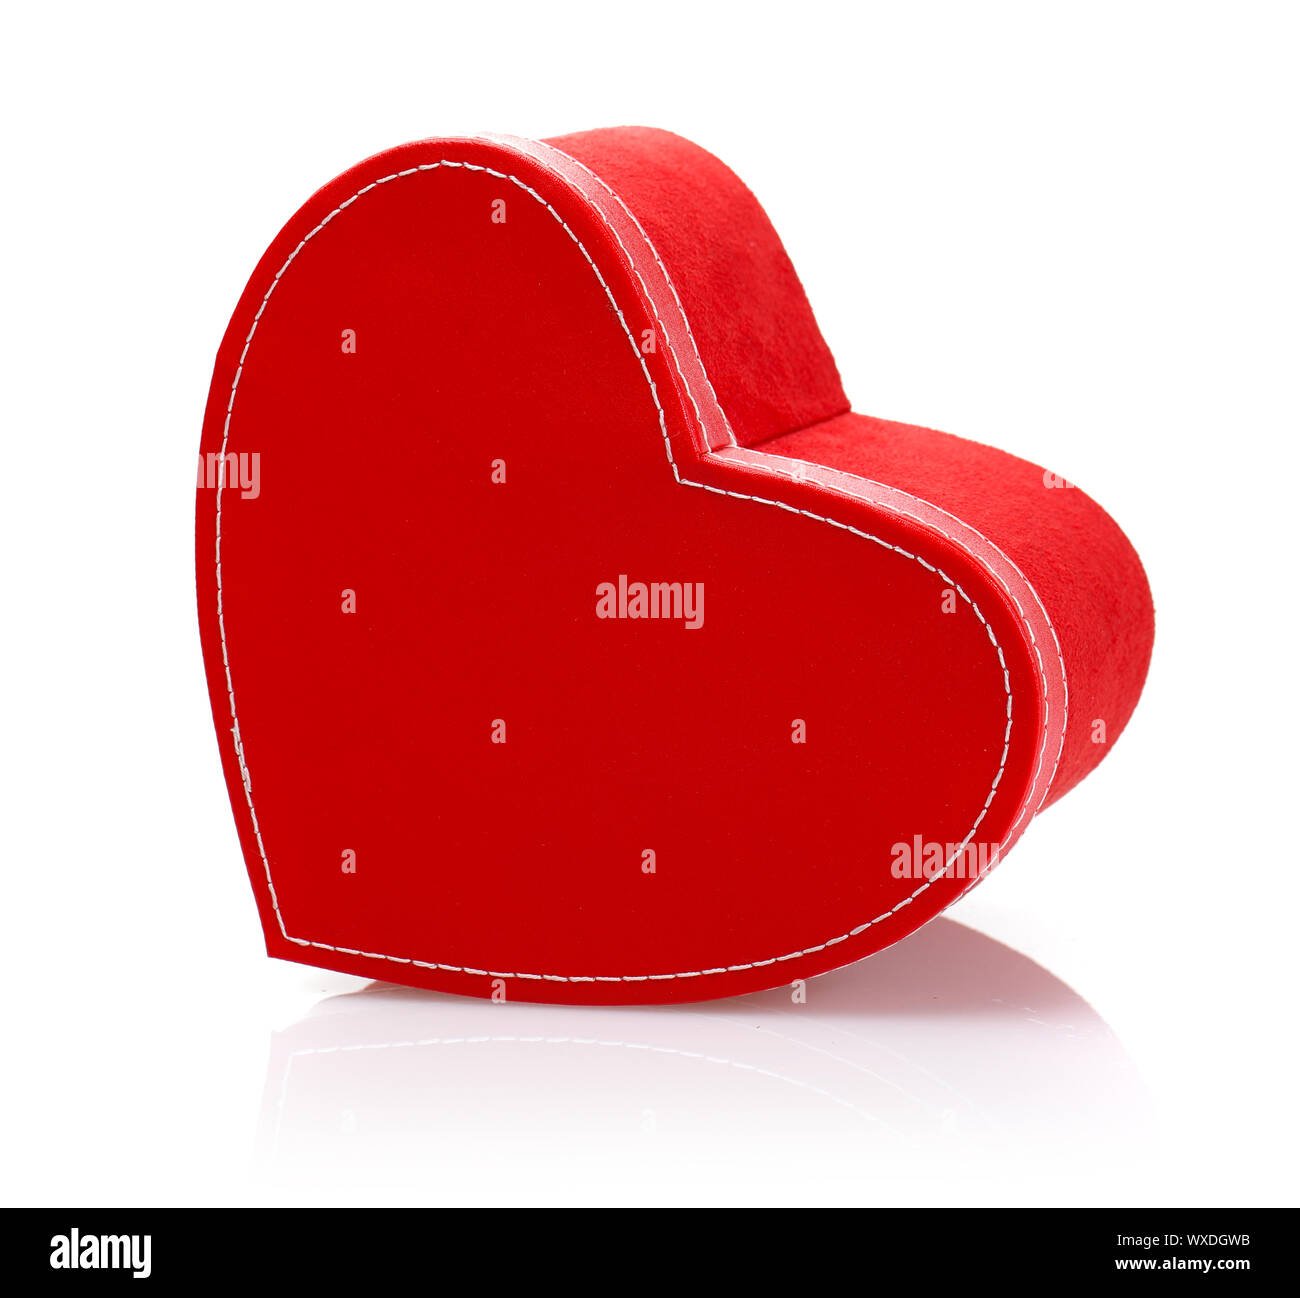 Red heart-shaped present box Stock Photo